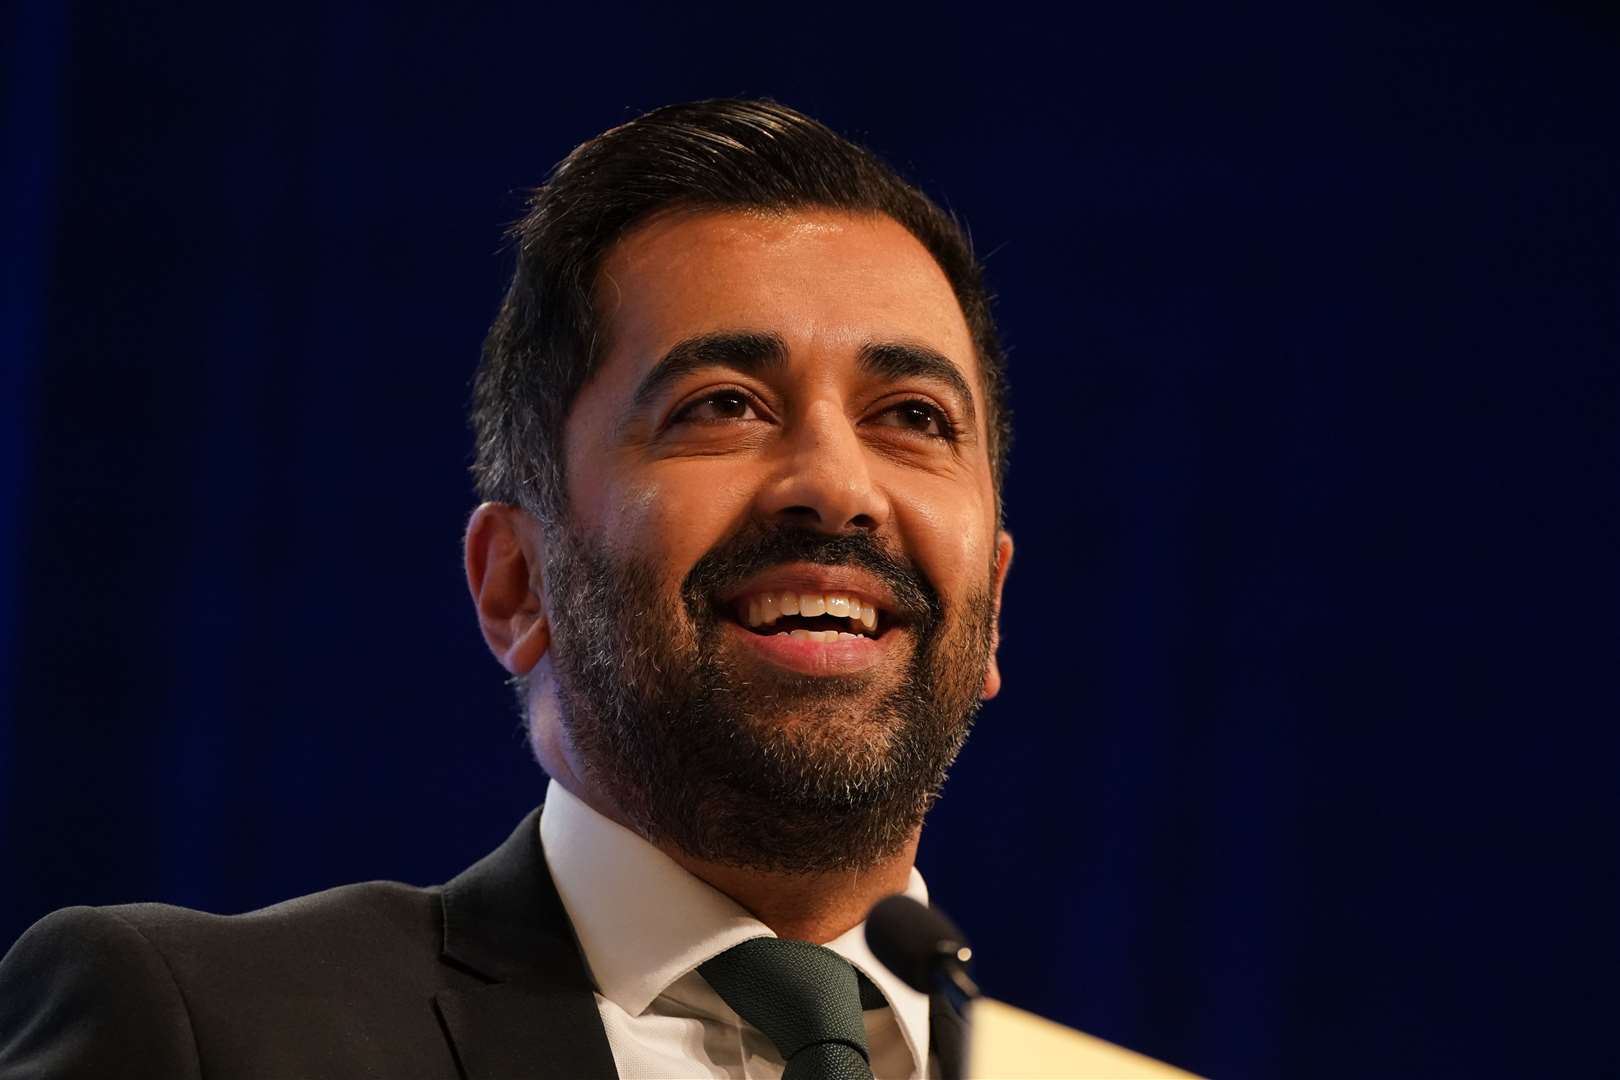 Humza Yousaf addressed the SNP conference for the first time as leader (Andrew Milligan/PA)